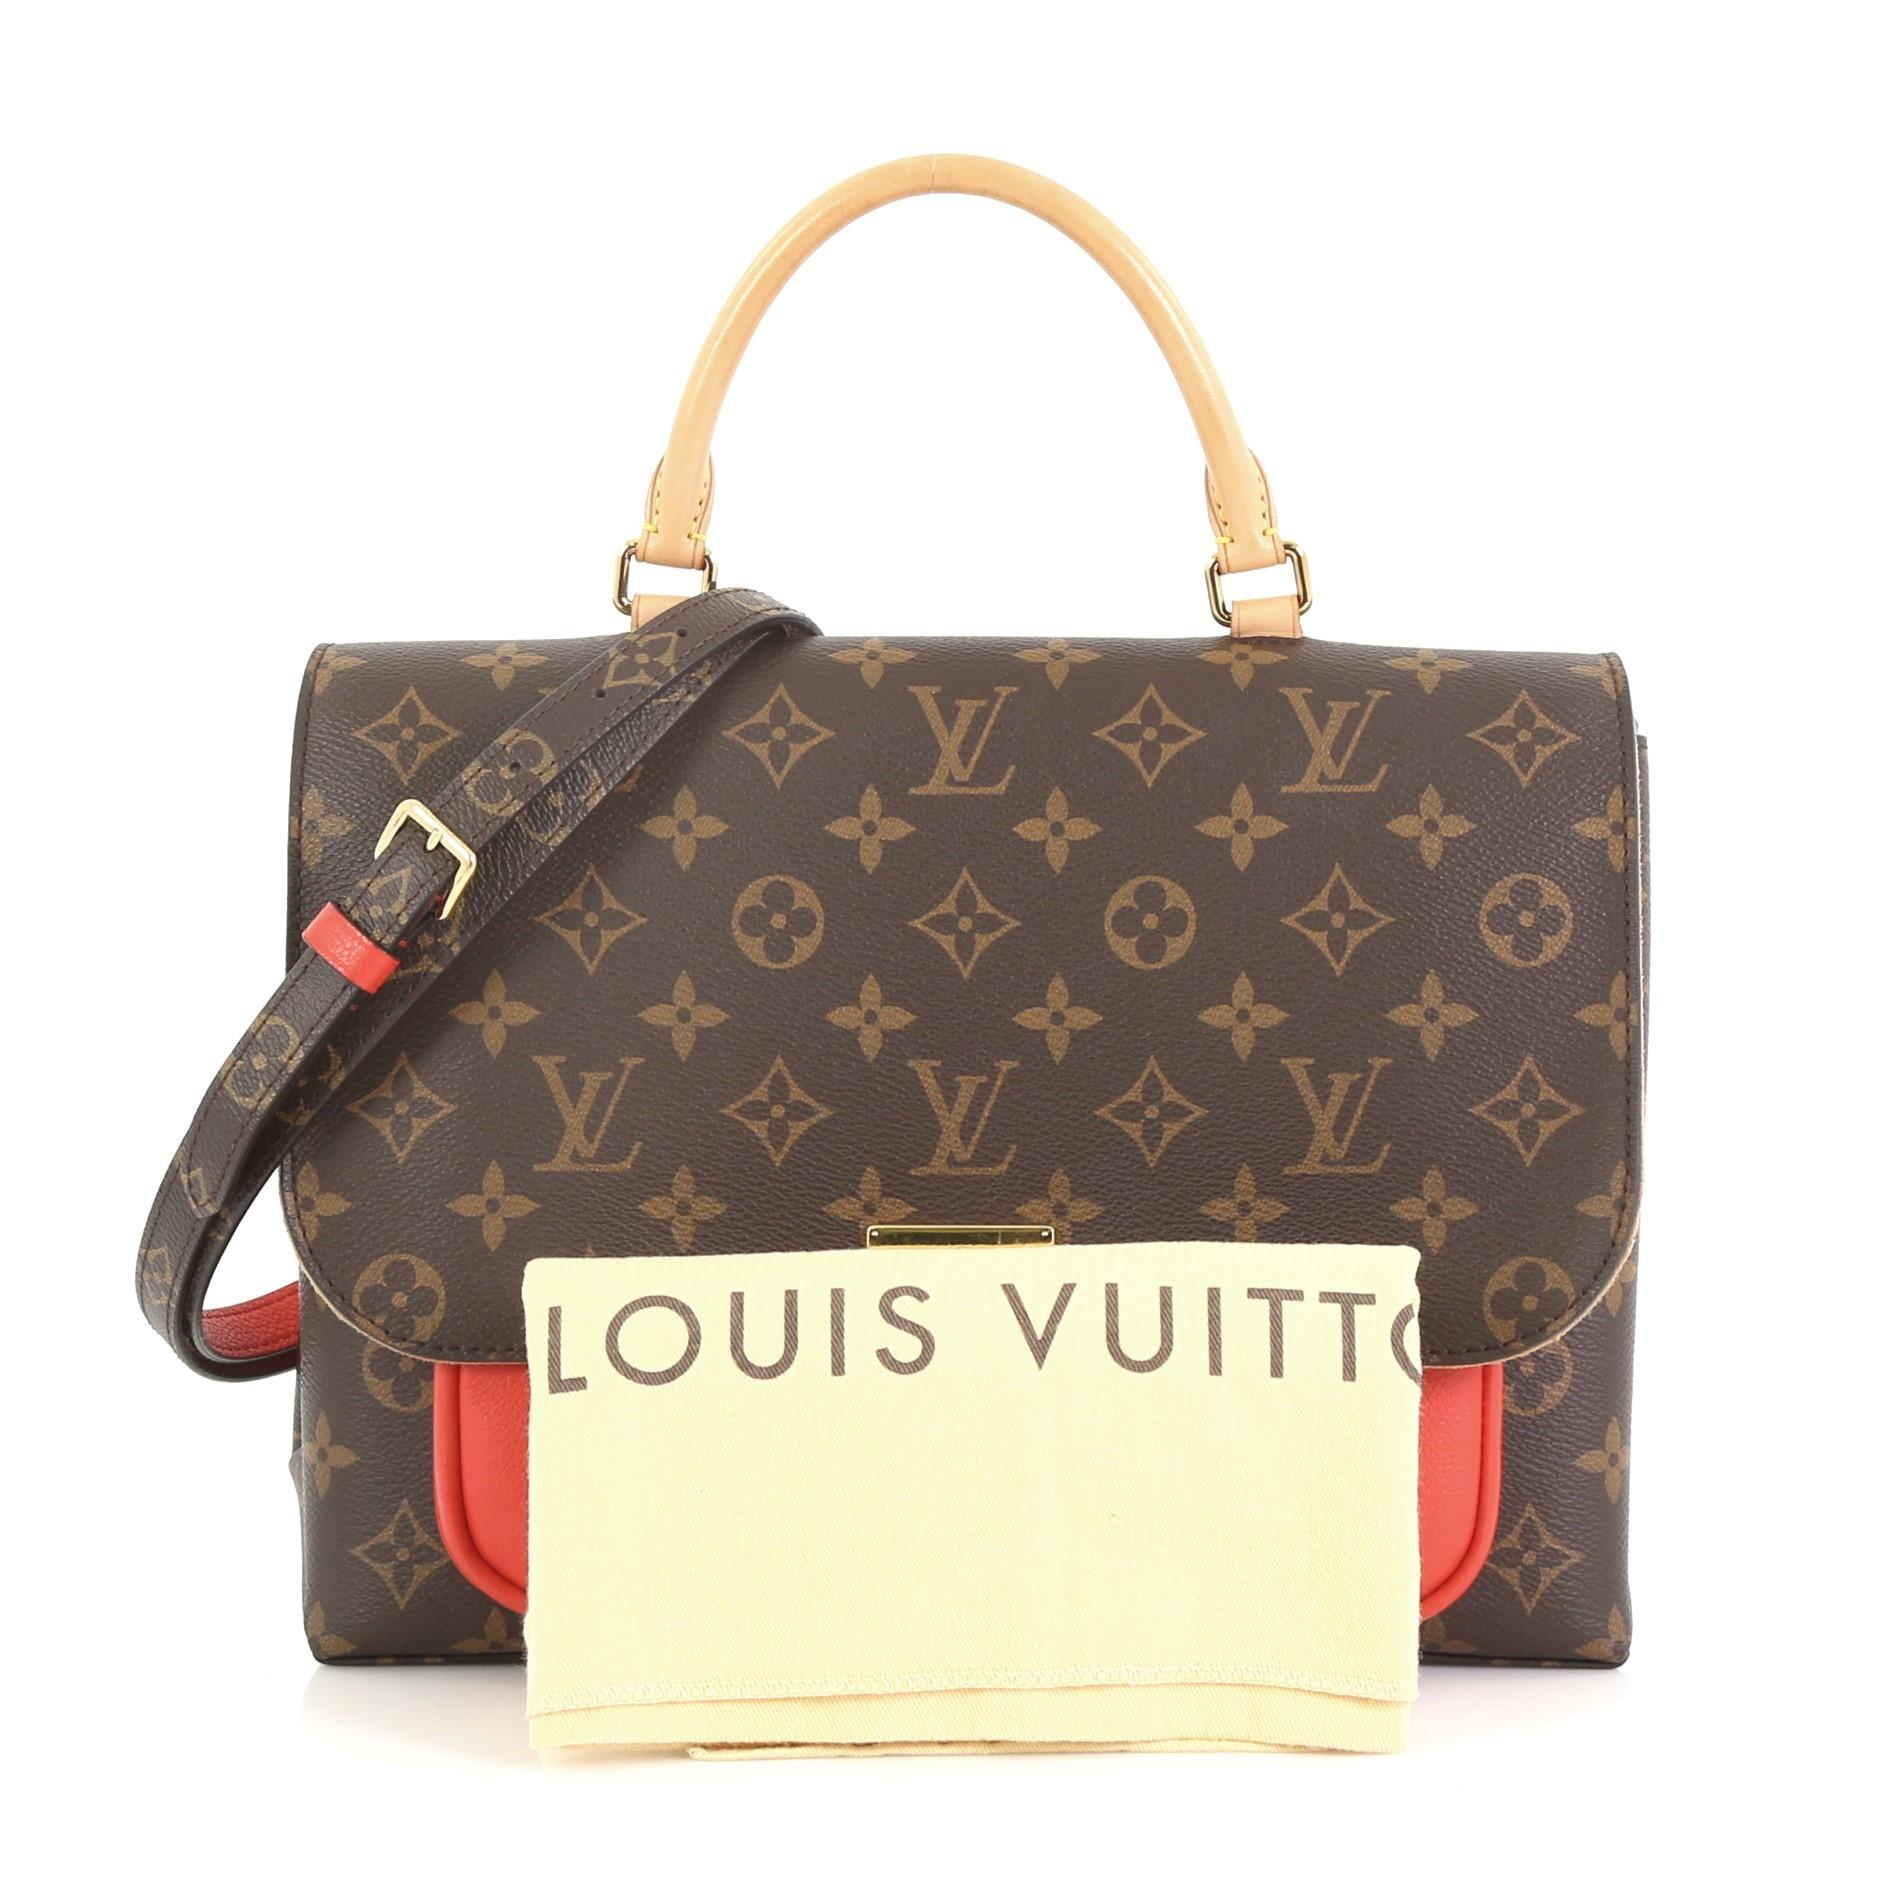 This Louis Vuitton Marignan Handbag Monogram Canvas with Leather, crafted in brown monogram coated canvas with red leather, features a rolled leather top handle, exterior flat pocket under flap, and gold-tone hardware. Its flap opens to a brown